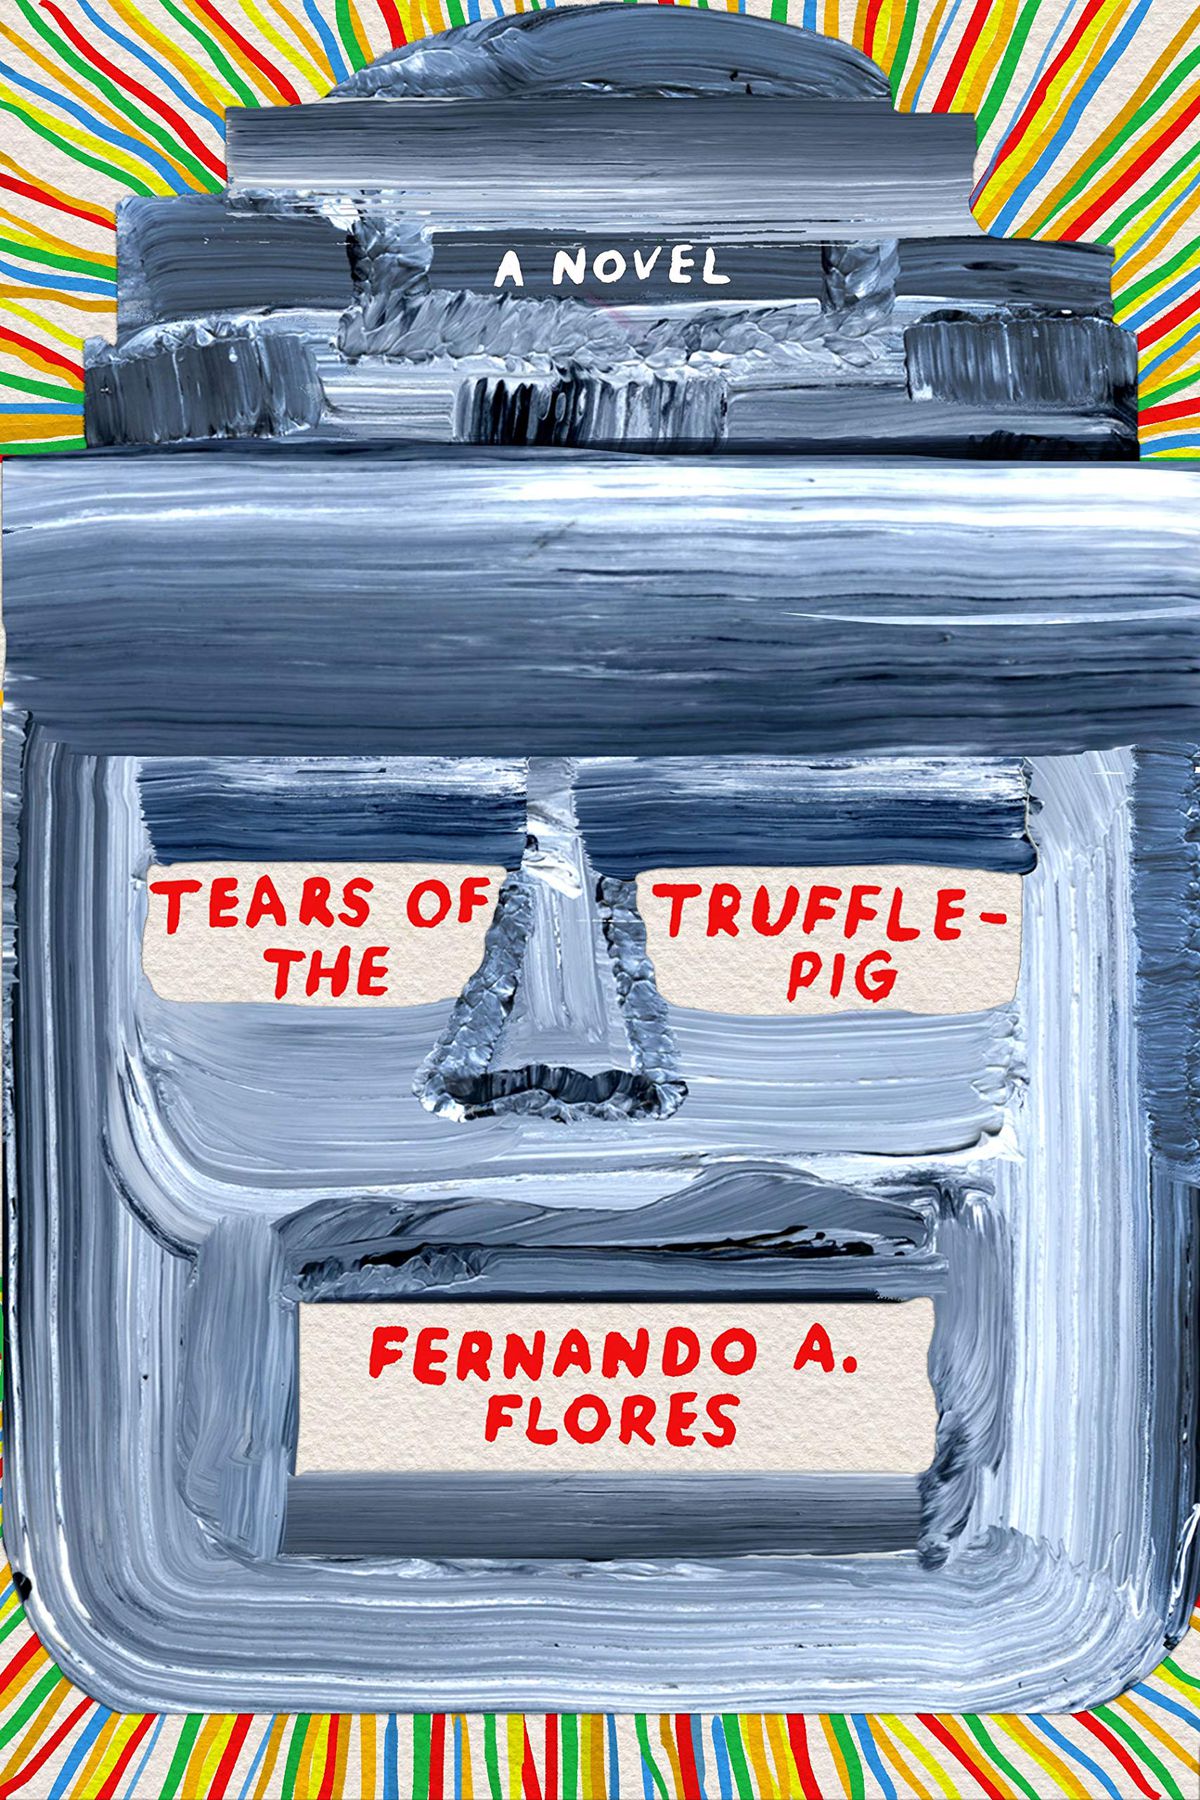 The cover of Tears of the Trufflepig by Fernando A. Flores